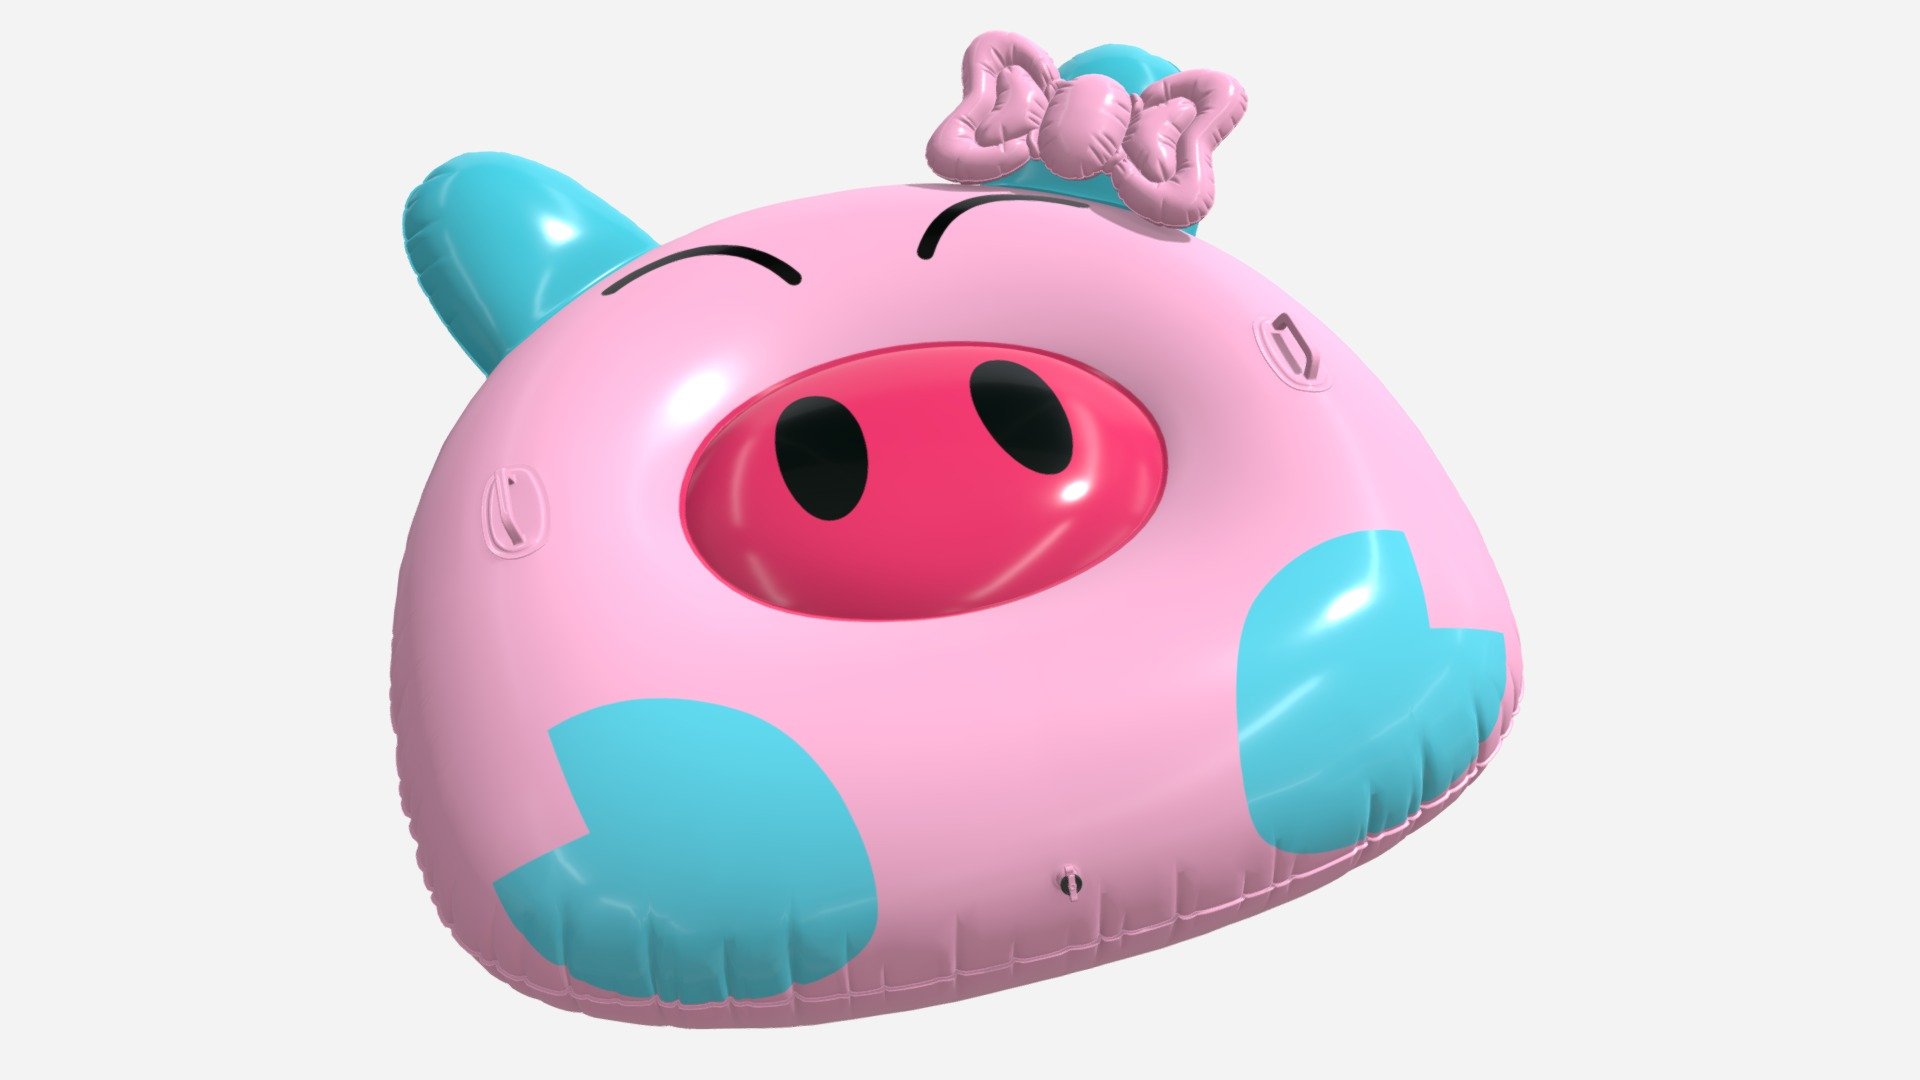 PBR-texture
HAPAH Inflatable Animal Pool Float with Handle, 52” 
Large Swimming Lounge Raft Floatie for Kids Adults,
Funny Blow Up Floaty Ride on Water Party Toy for 6+ Years, Pink Pig - HAPAH Inflatable Animal Pool Float - 3D model by Dzhus Ivan (@dzhusione) 3d model